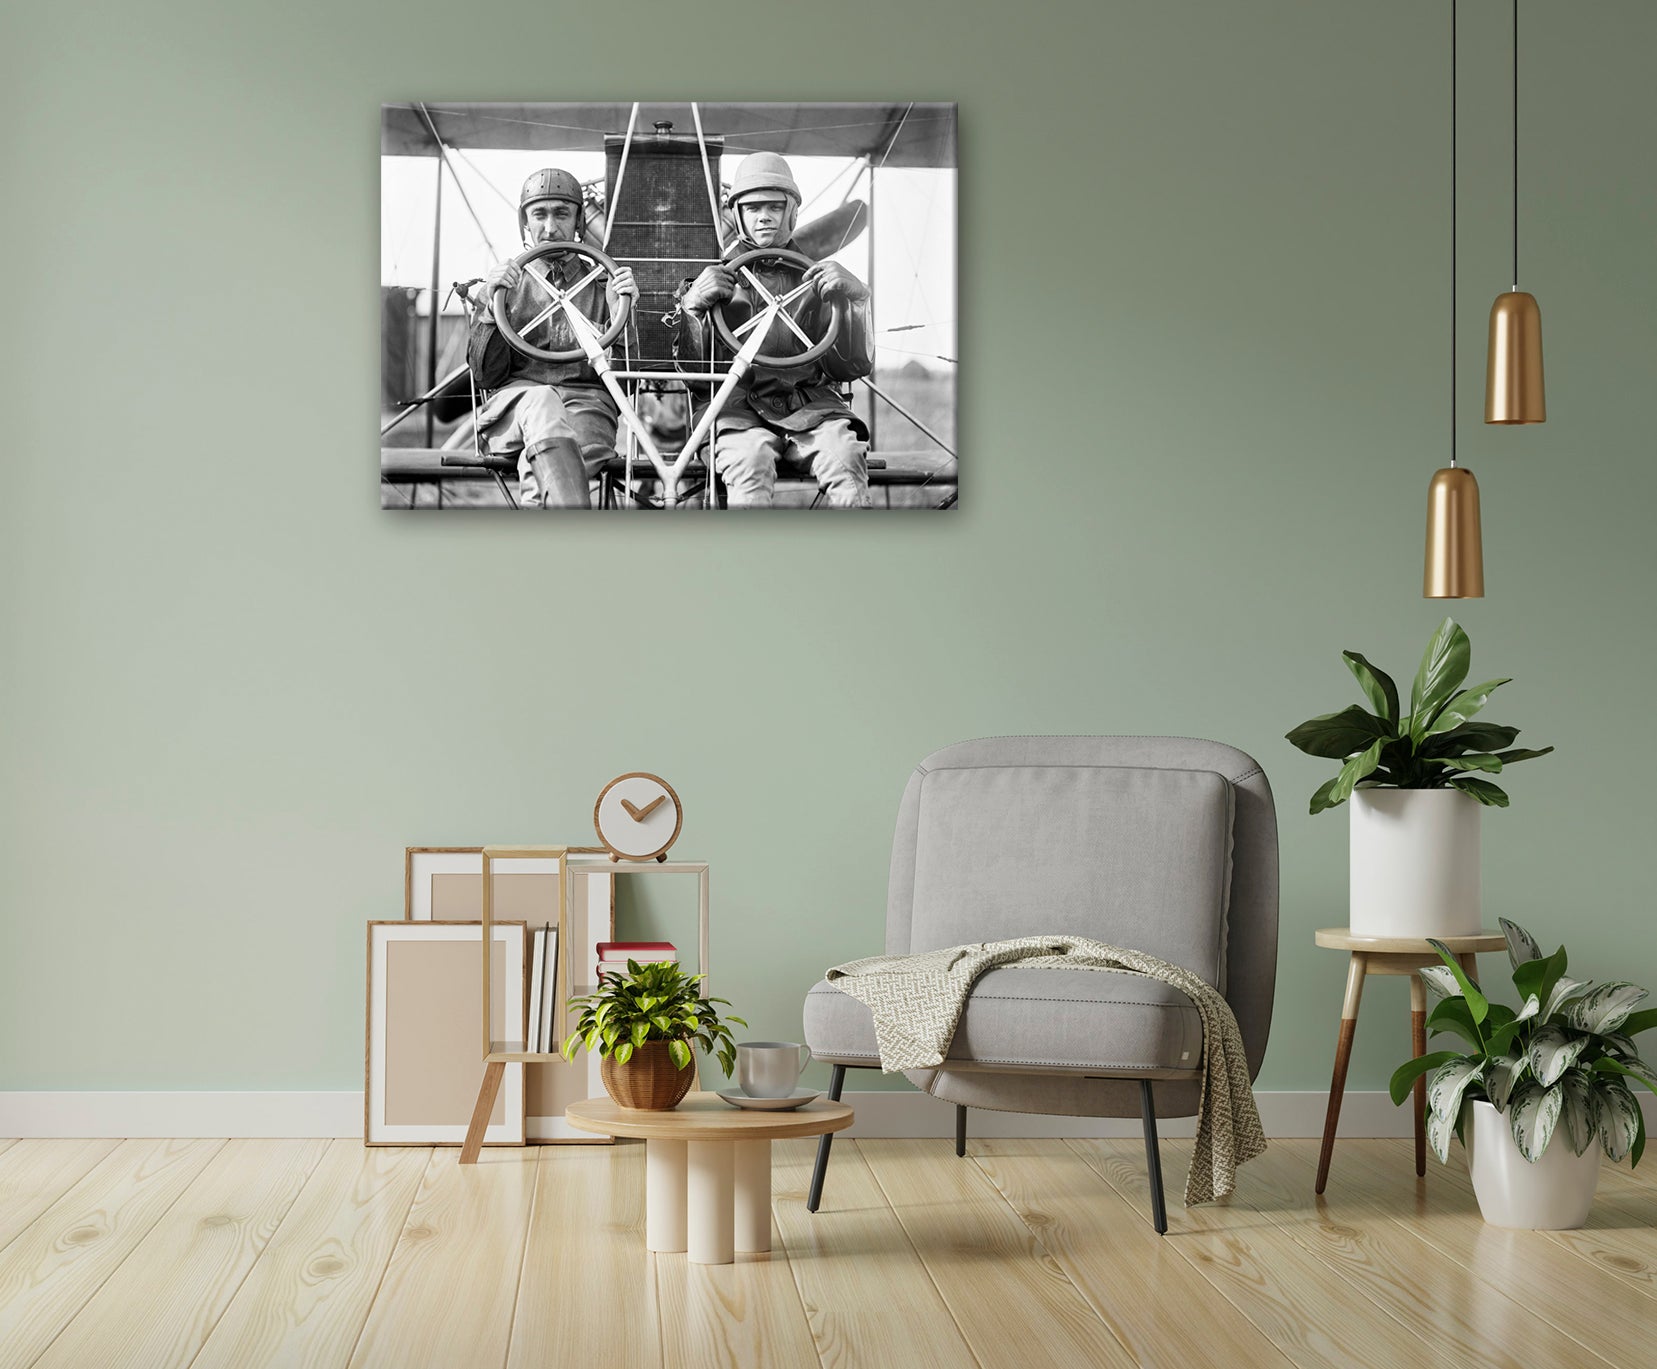 A canvas print of vintage photograph of two men in a plane hanging on a green living room wall